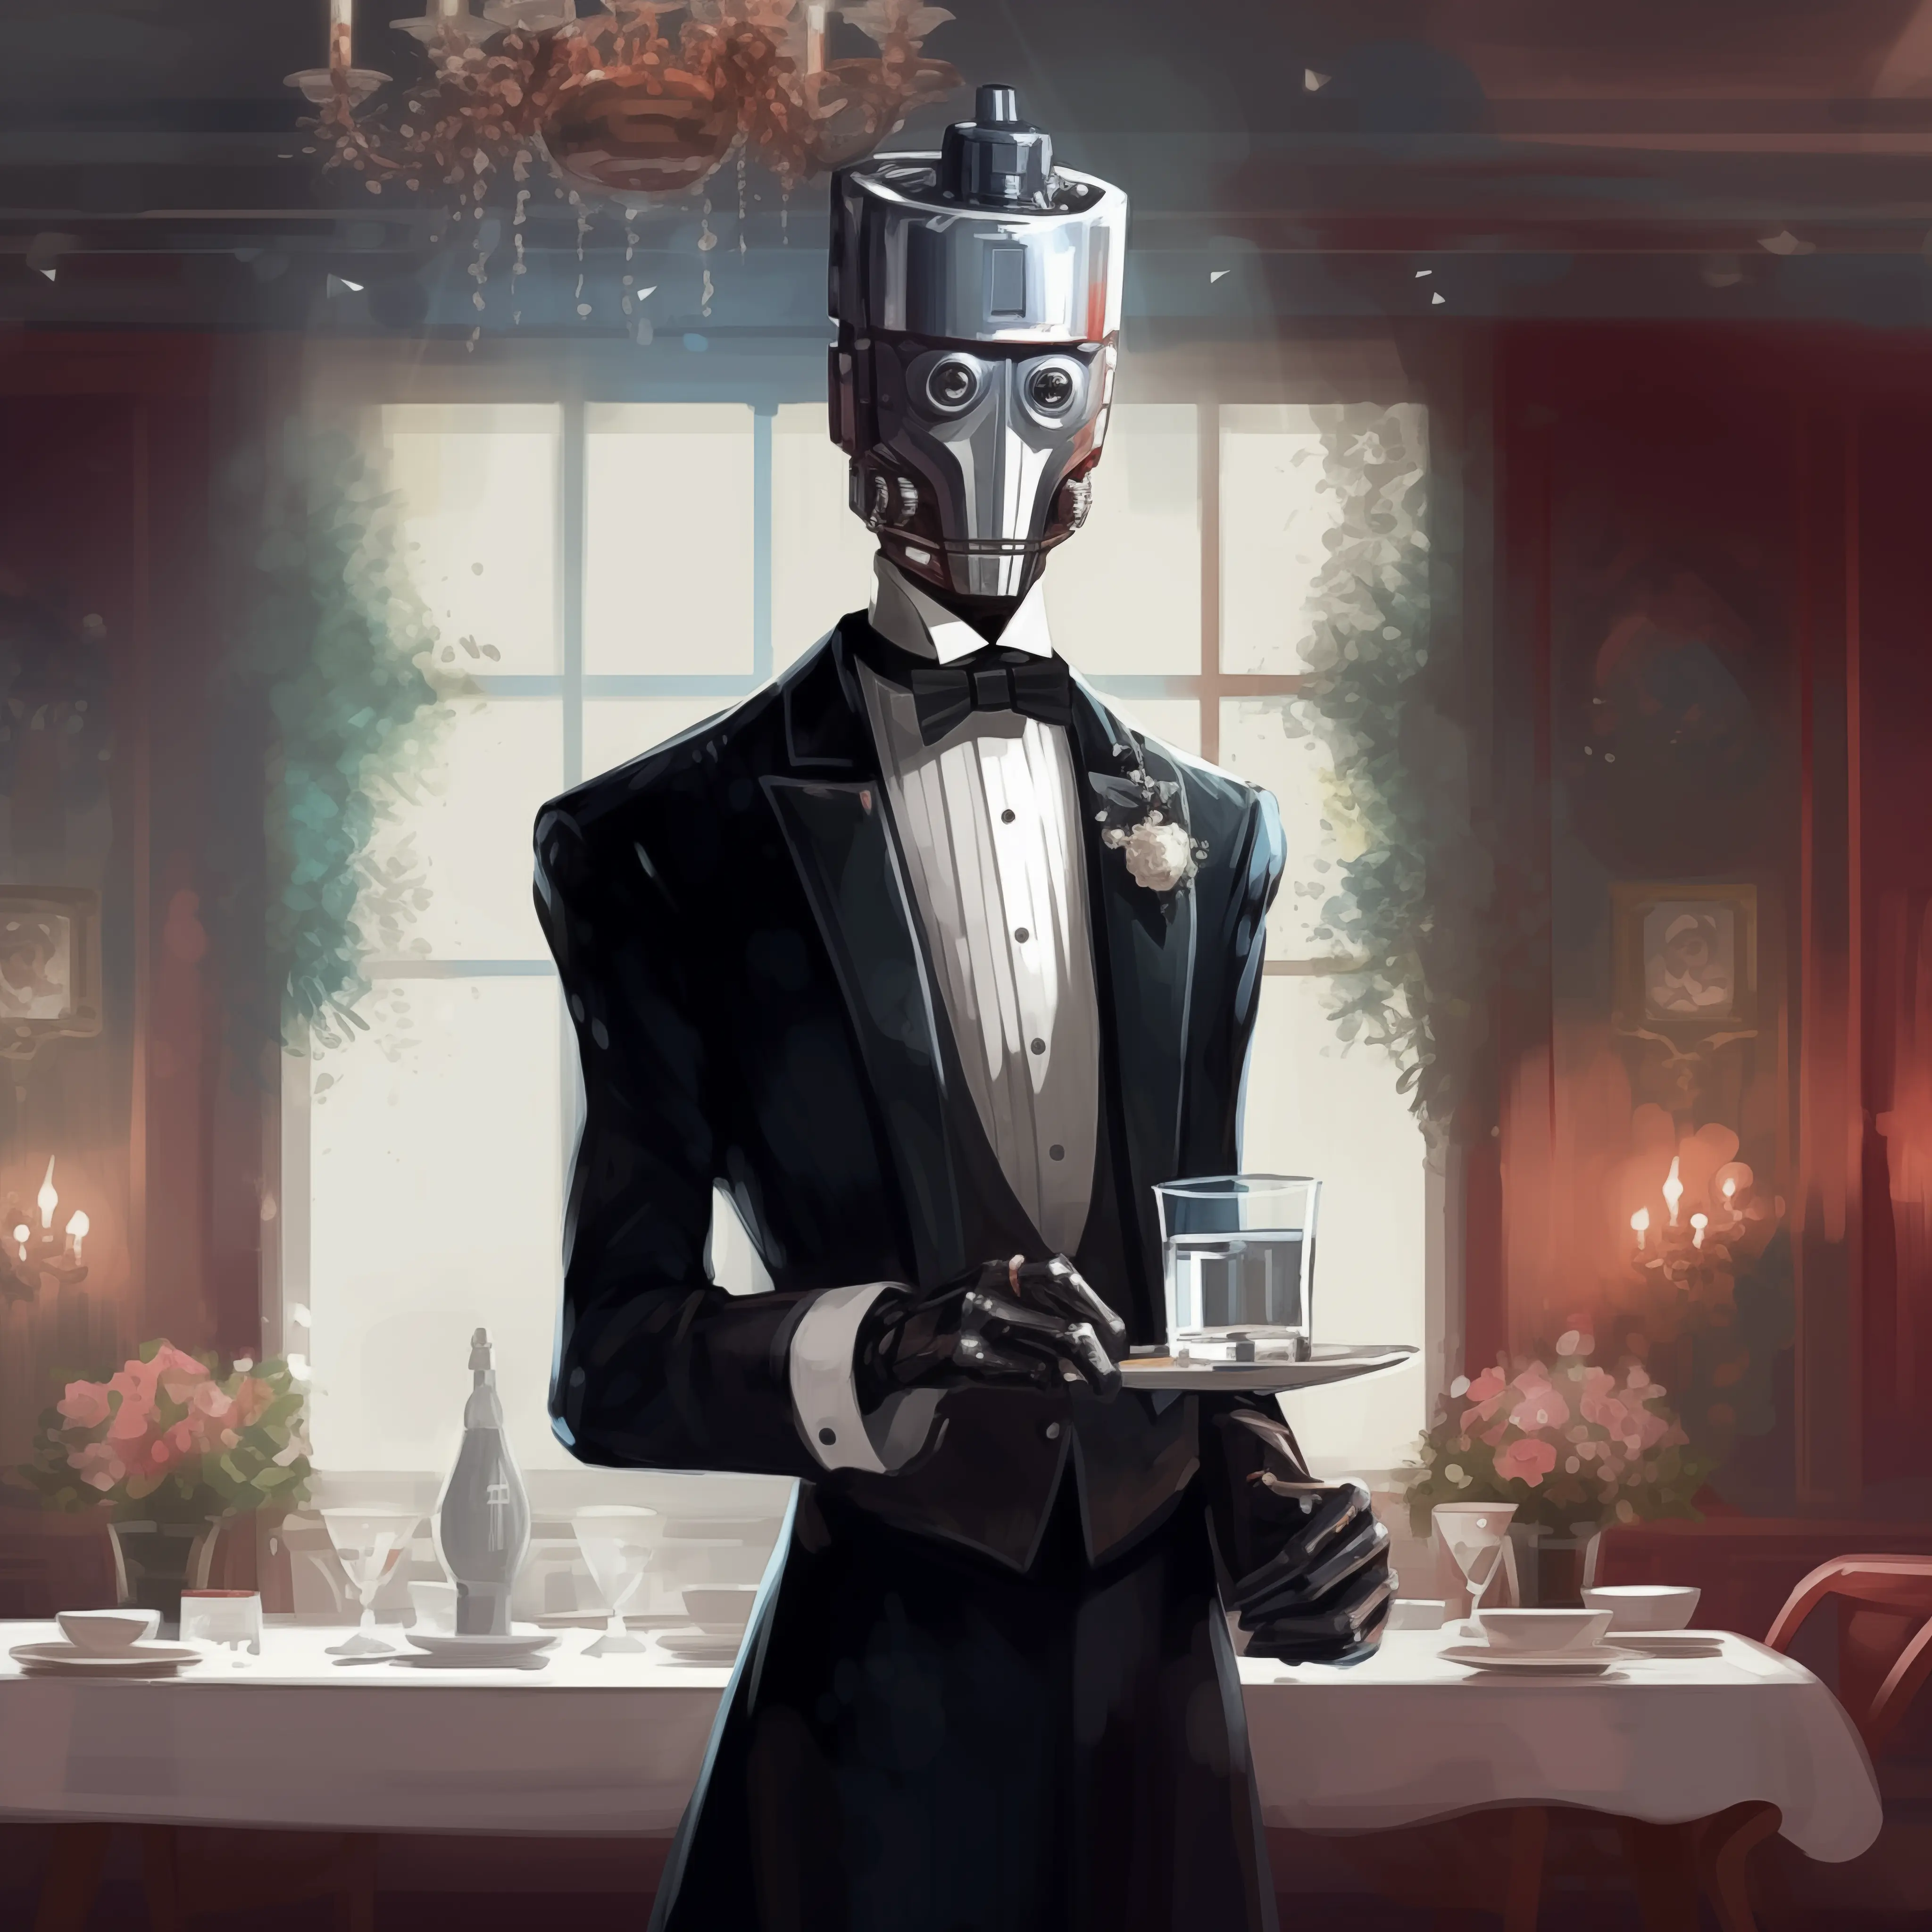 A Chives robotic waiter dressed in a tuxedo. Made by Xomtek